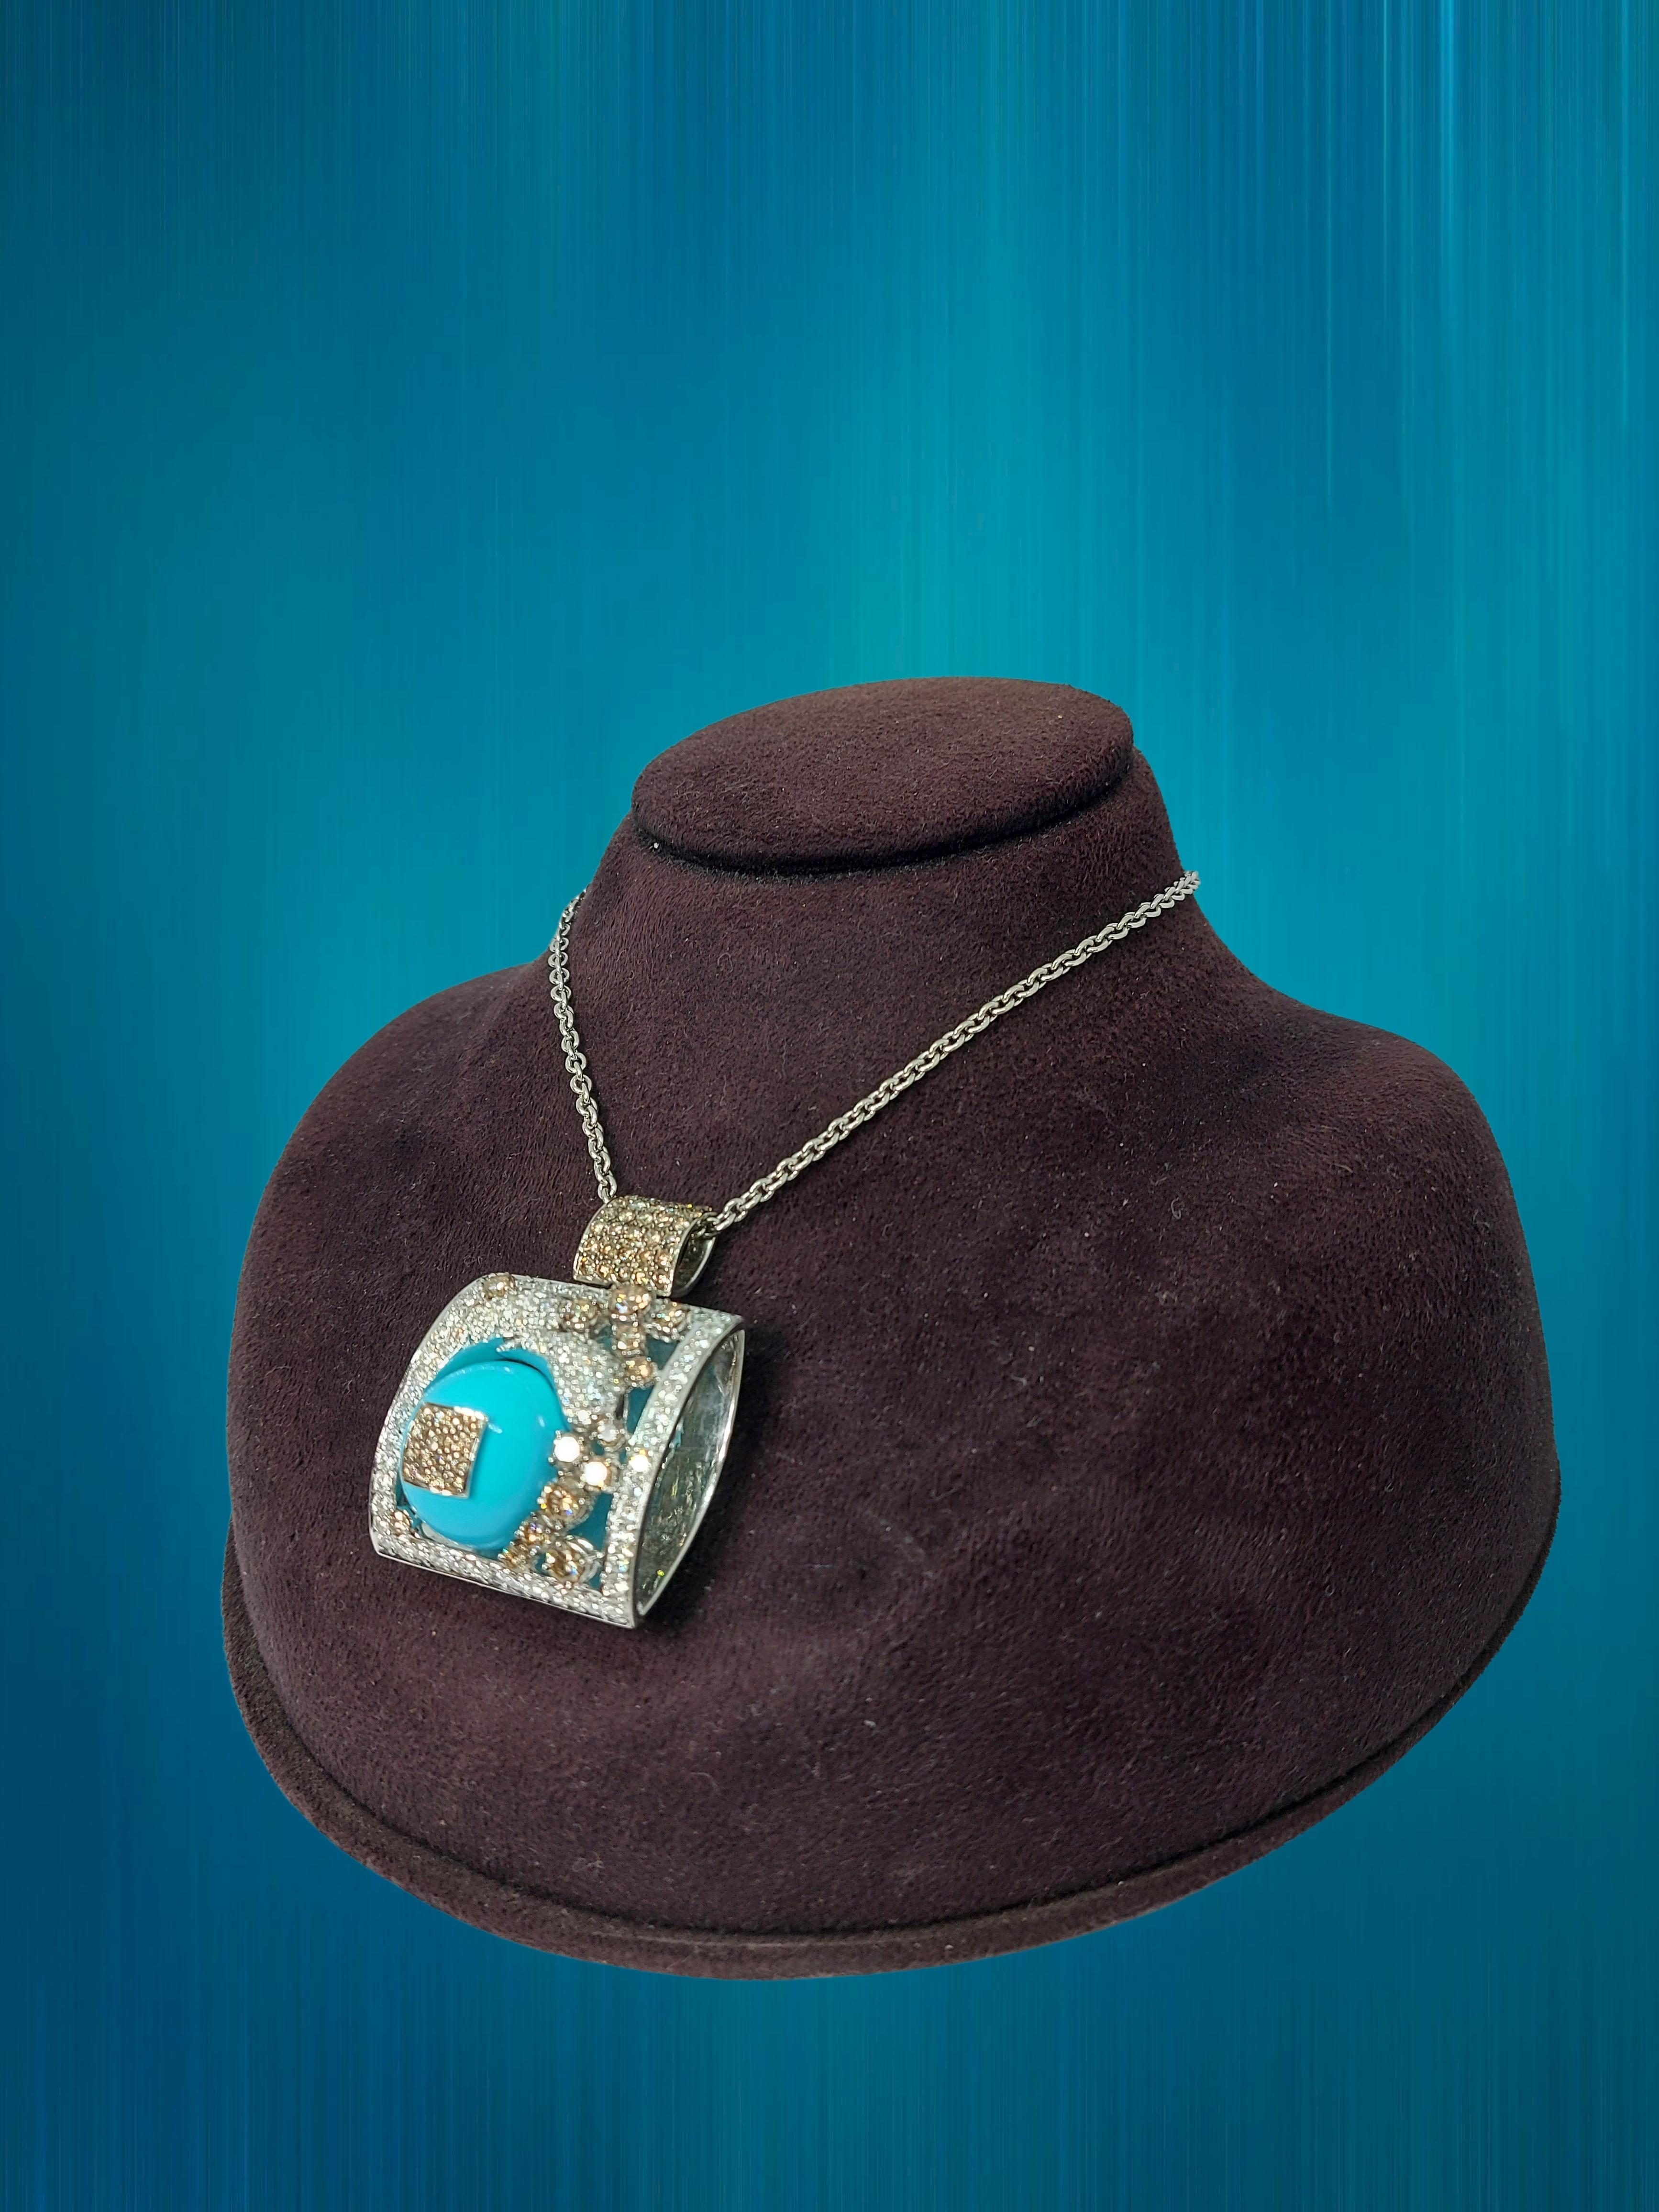 Stunning 18kt White Gold Pendant / Necklace with Turquoise and Diamonds 13